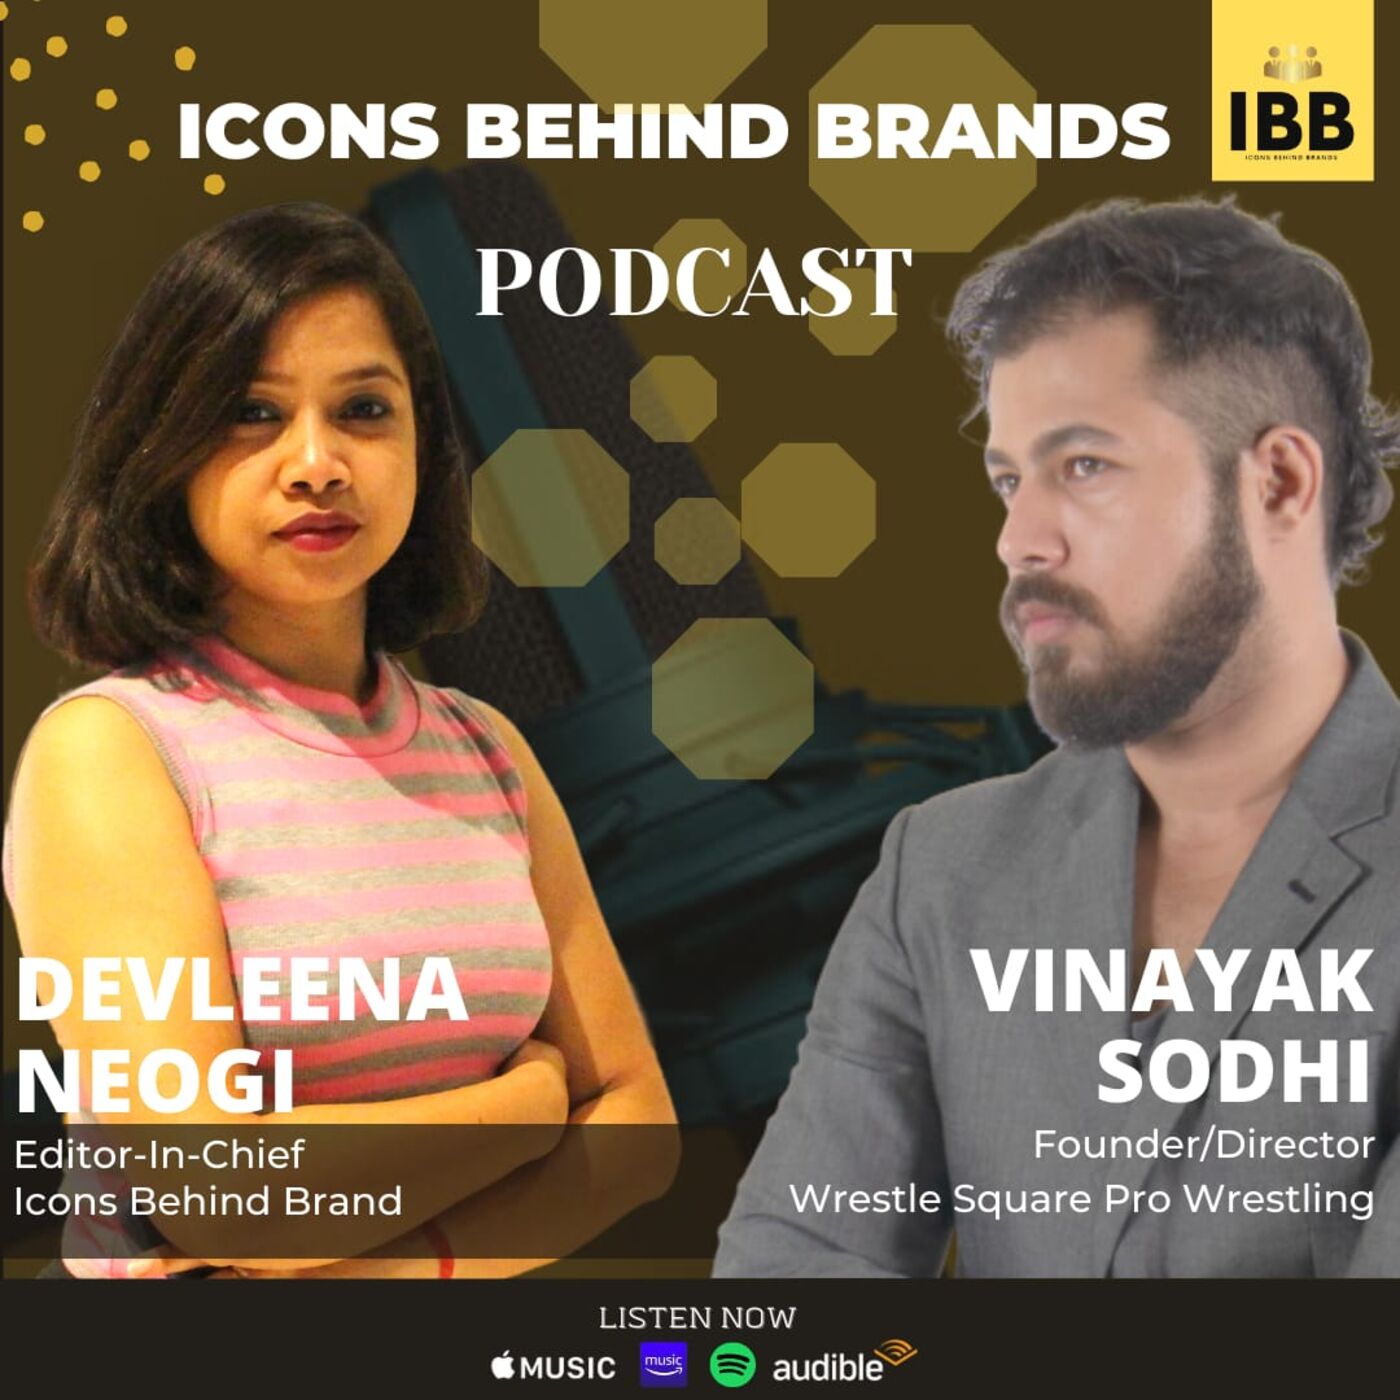 Upcoming insightful conversation on running a unique business venture | Vinayak Sodhi | Wrestle Square | Icons Behind Brands